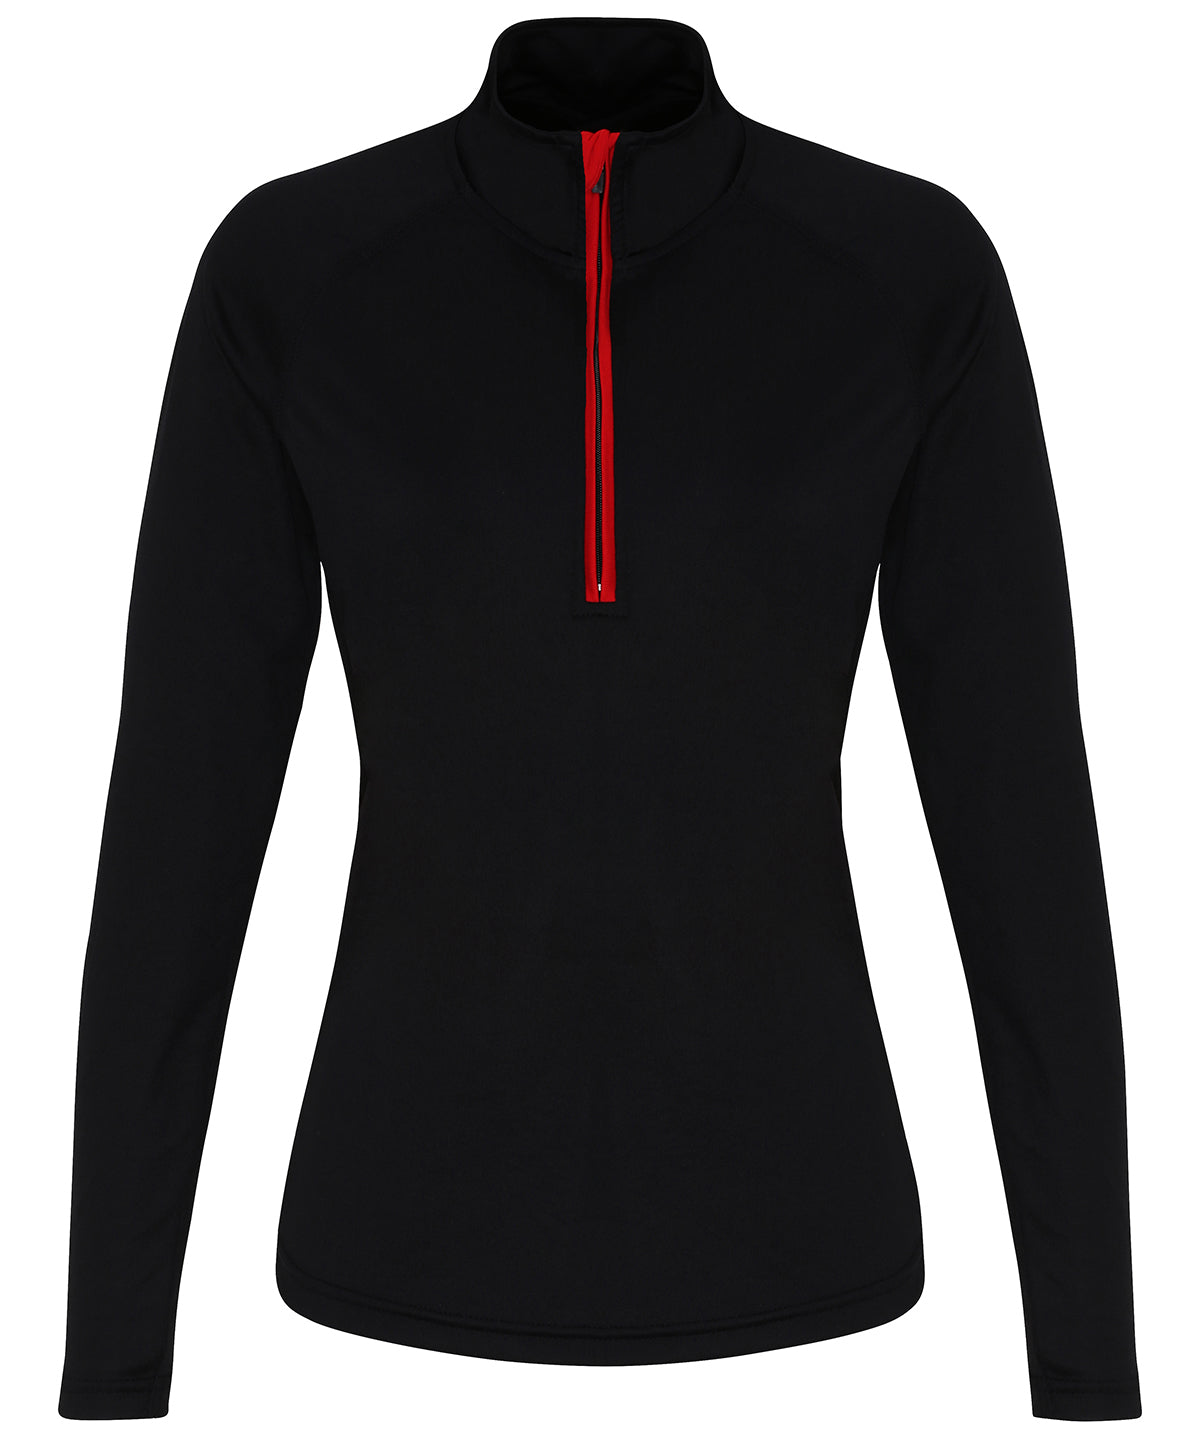 Black/Red - Women's TriDri® performance ¼ zip Sports Overtops TriDri® Activewear & Performance, Athleisurewear, Back to Fitness, Exclusives, Outdoor Sports, Rebrandable, Sports & Leisure, UPF Protection Schoolwear Centres